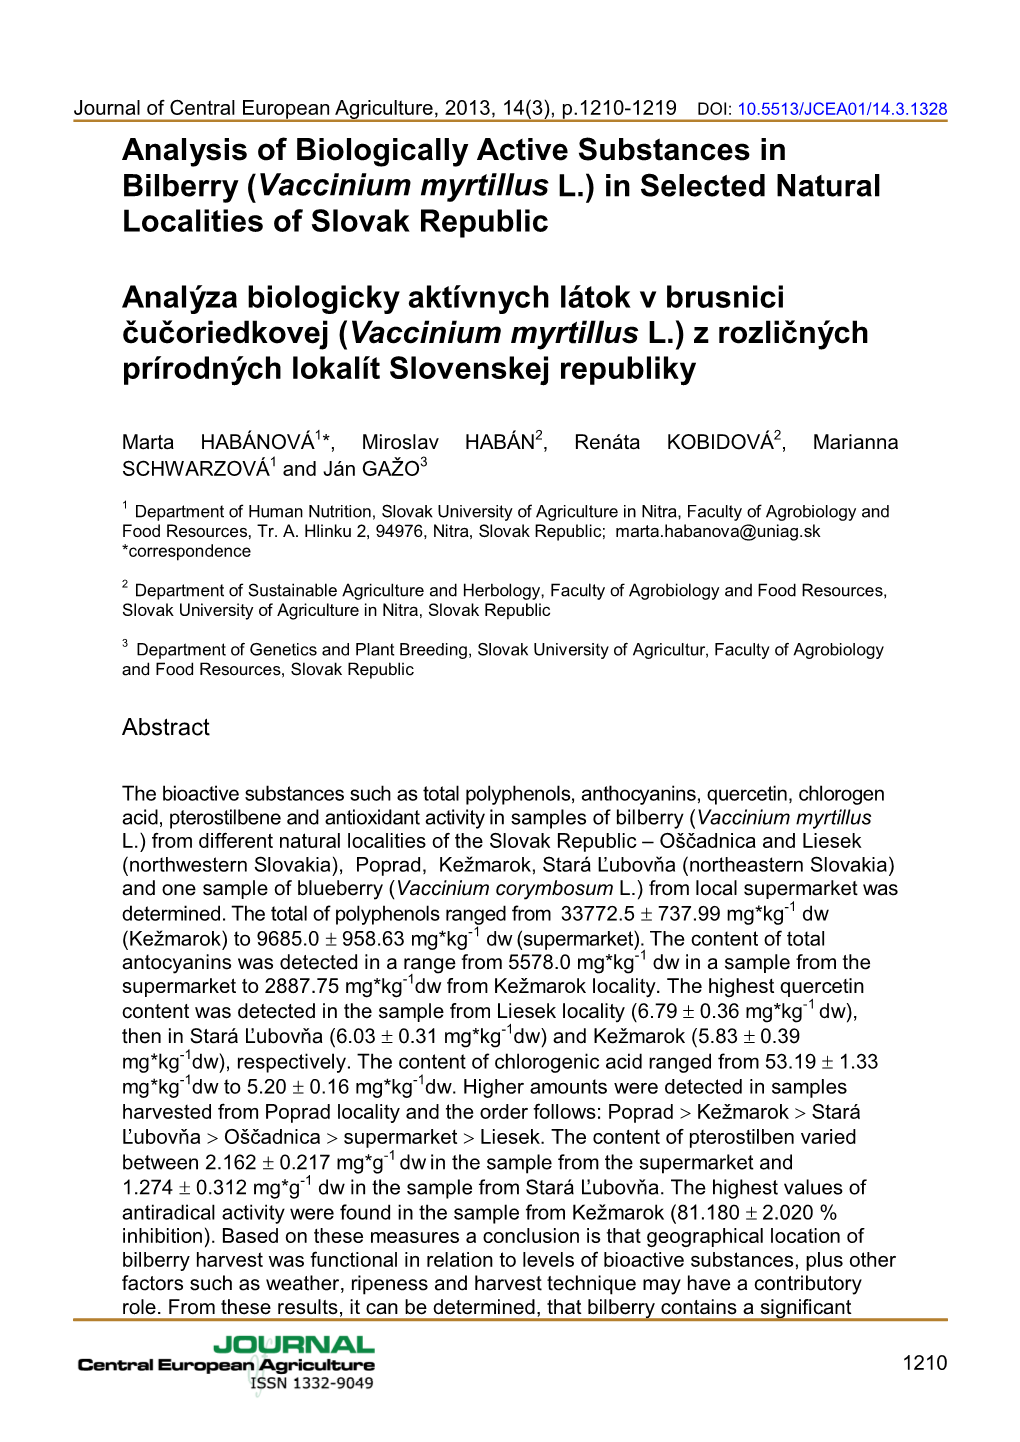 Analysis of Biologically Active Substances in Bilberry (Vaccinium Myrtillus L.) in Selected Natural Localities of Slovak Republic